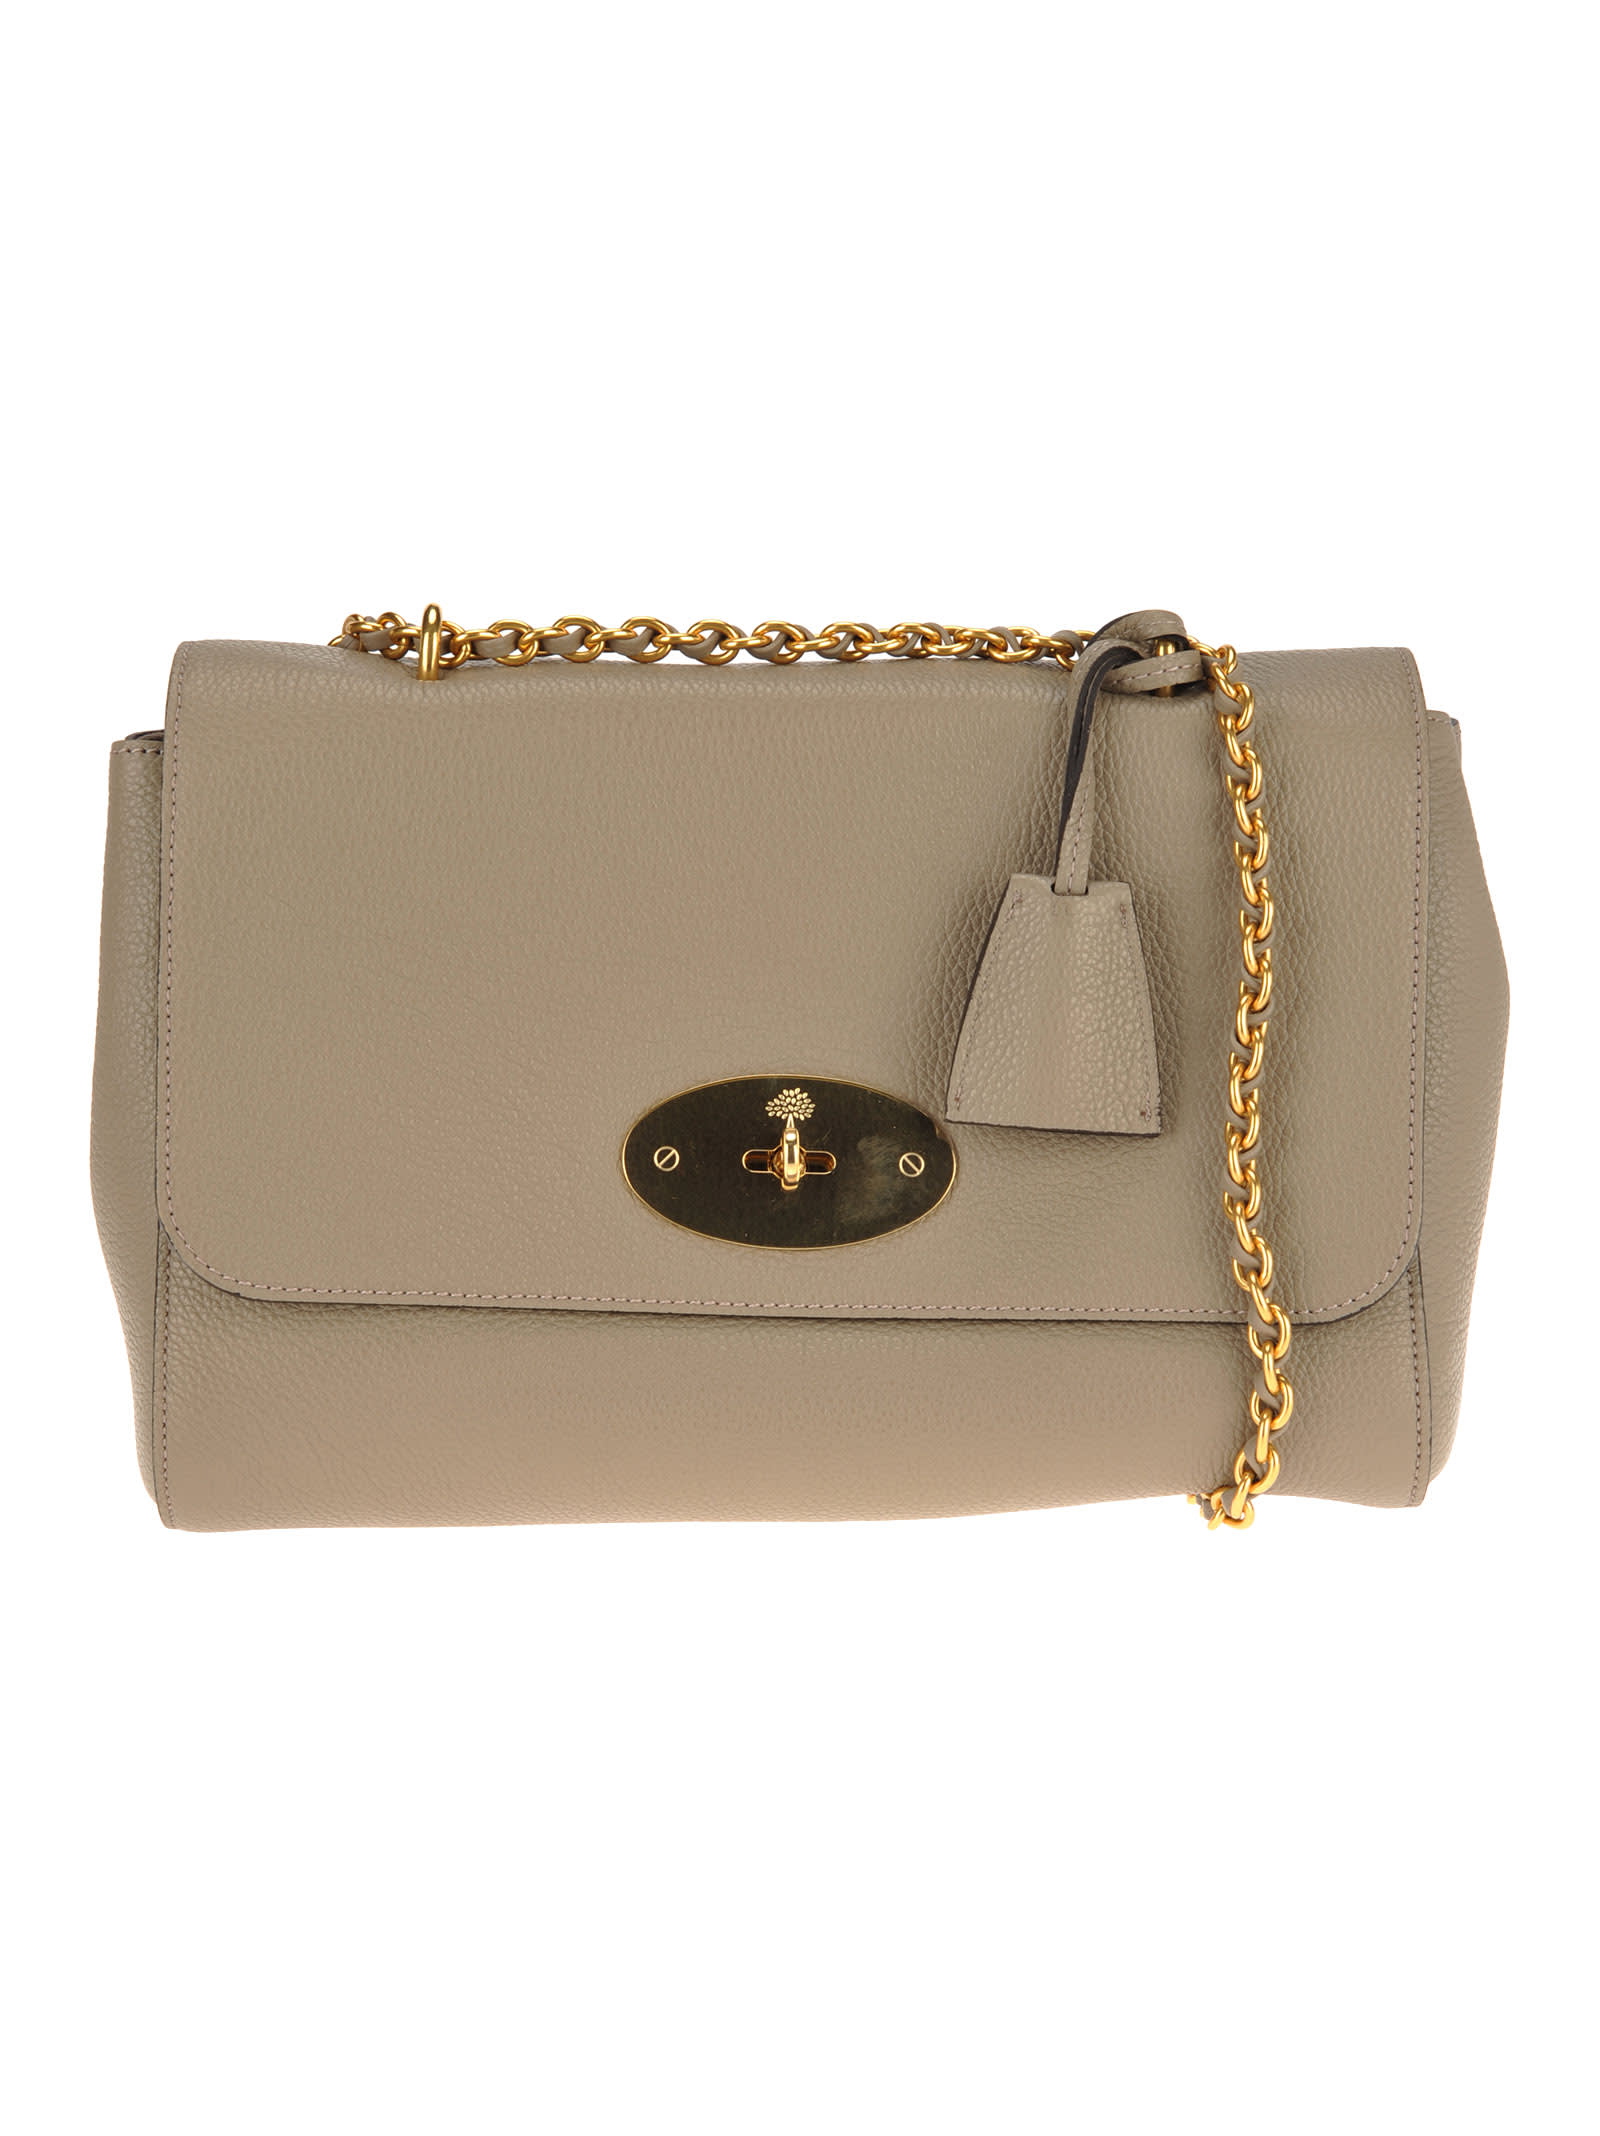 Mulberry Mulberry Medium Lily Shoulder Bag - SOLID GREY - 11087797 ...